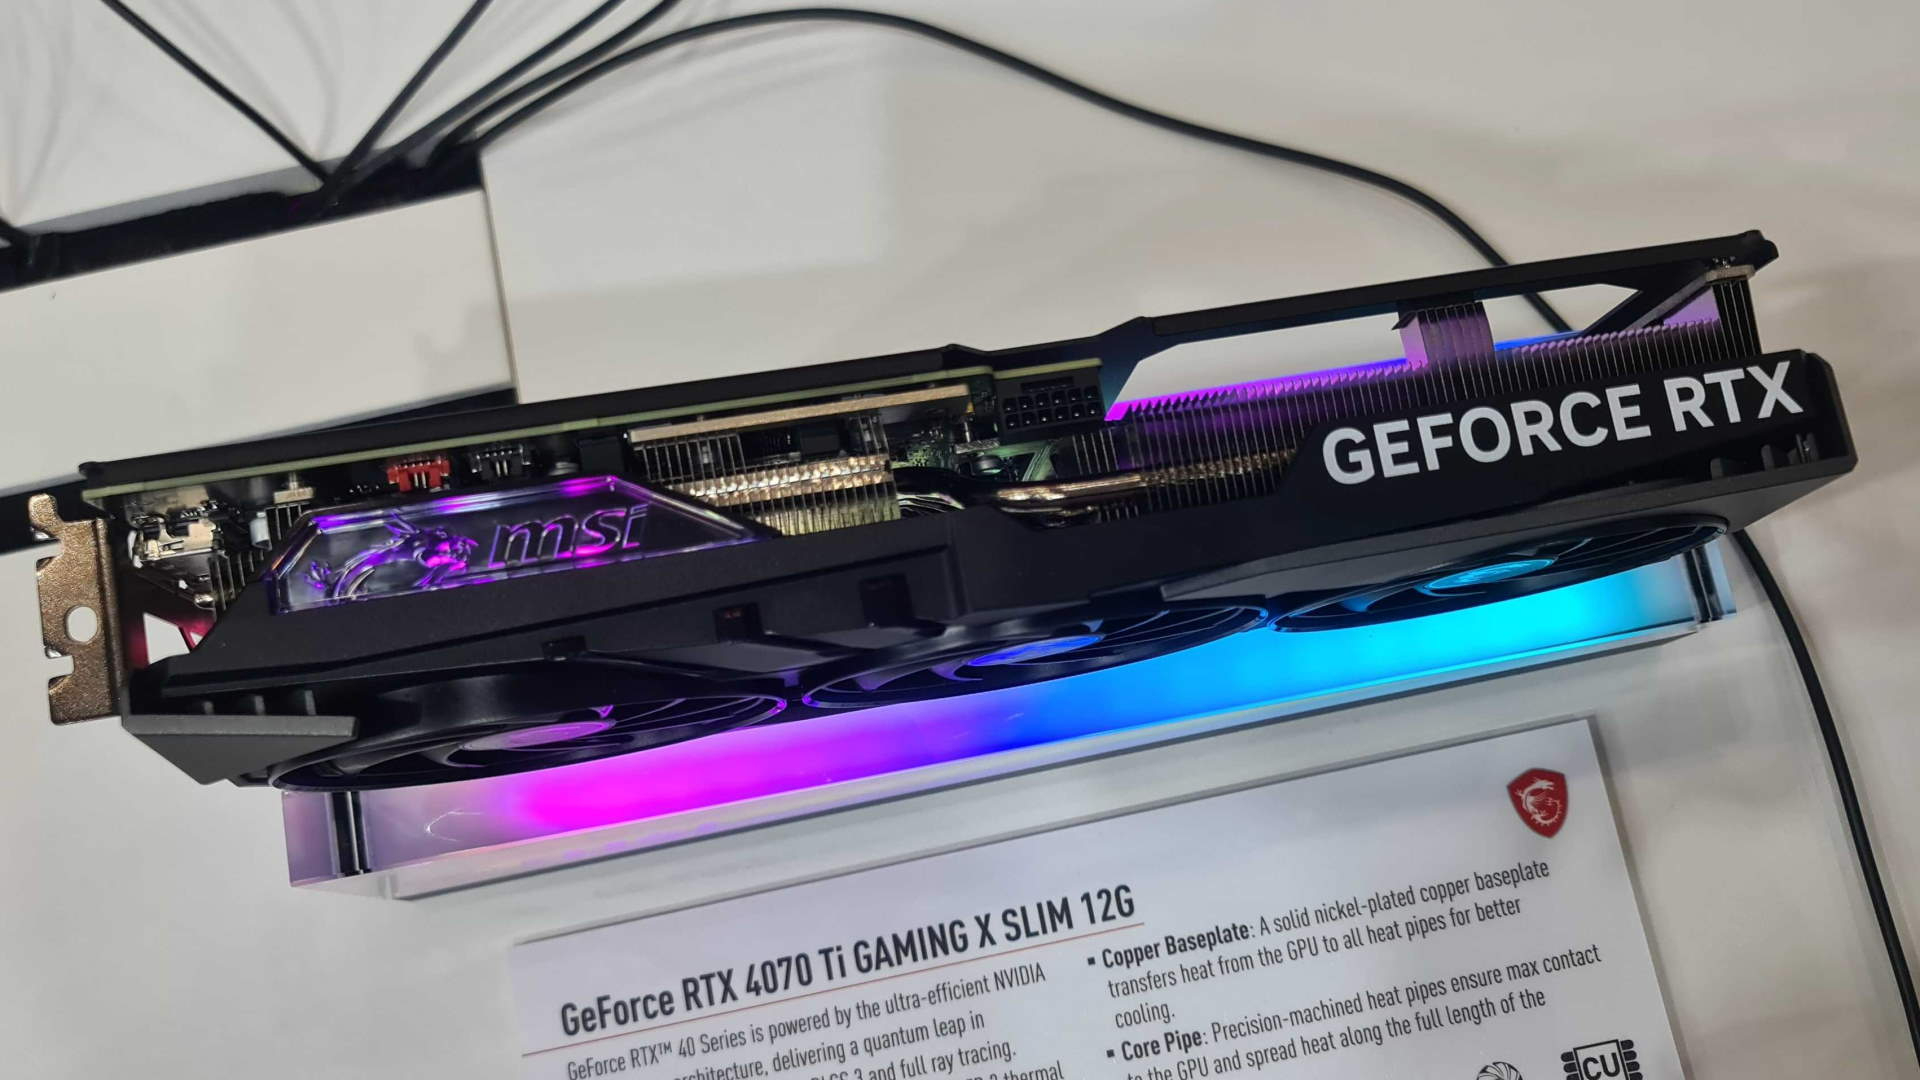 MSI's new line of Gaming X Slim graphics cards has made me irrationally  angry